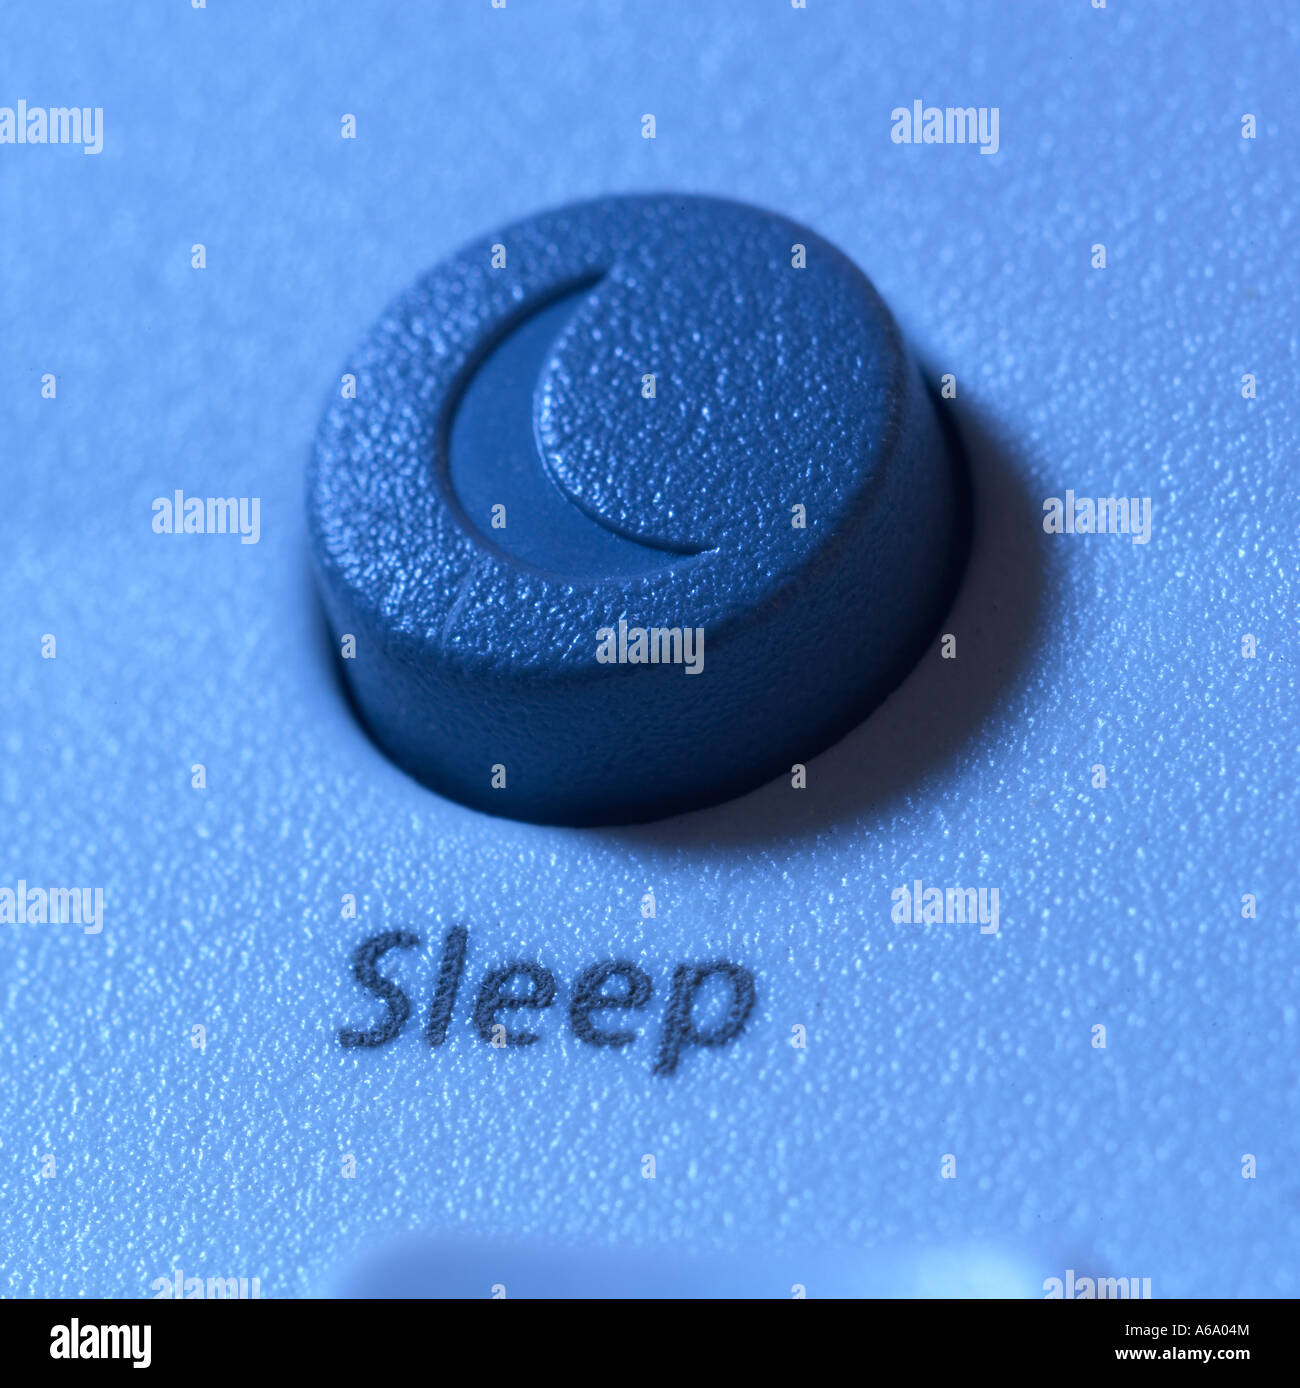 sleep icon from a computer keyboard with a cool blue glow Stock Photo